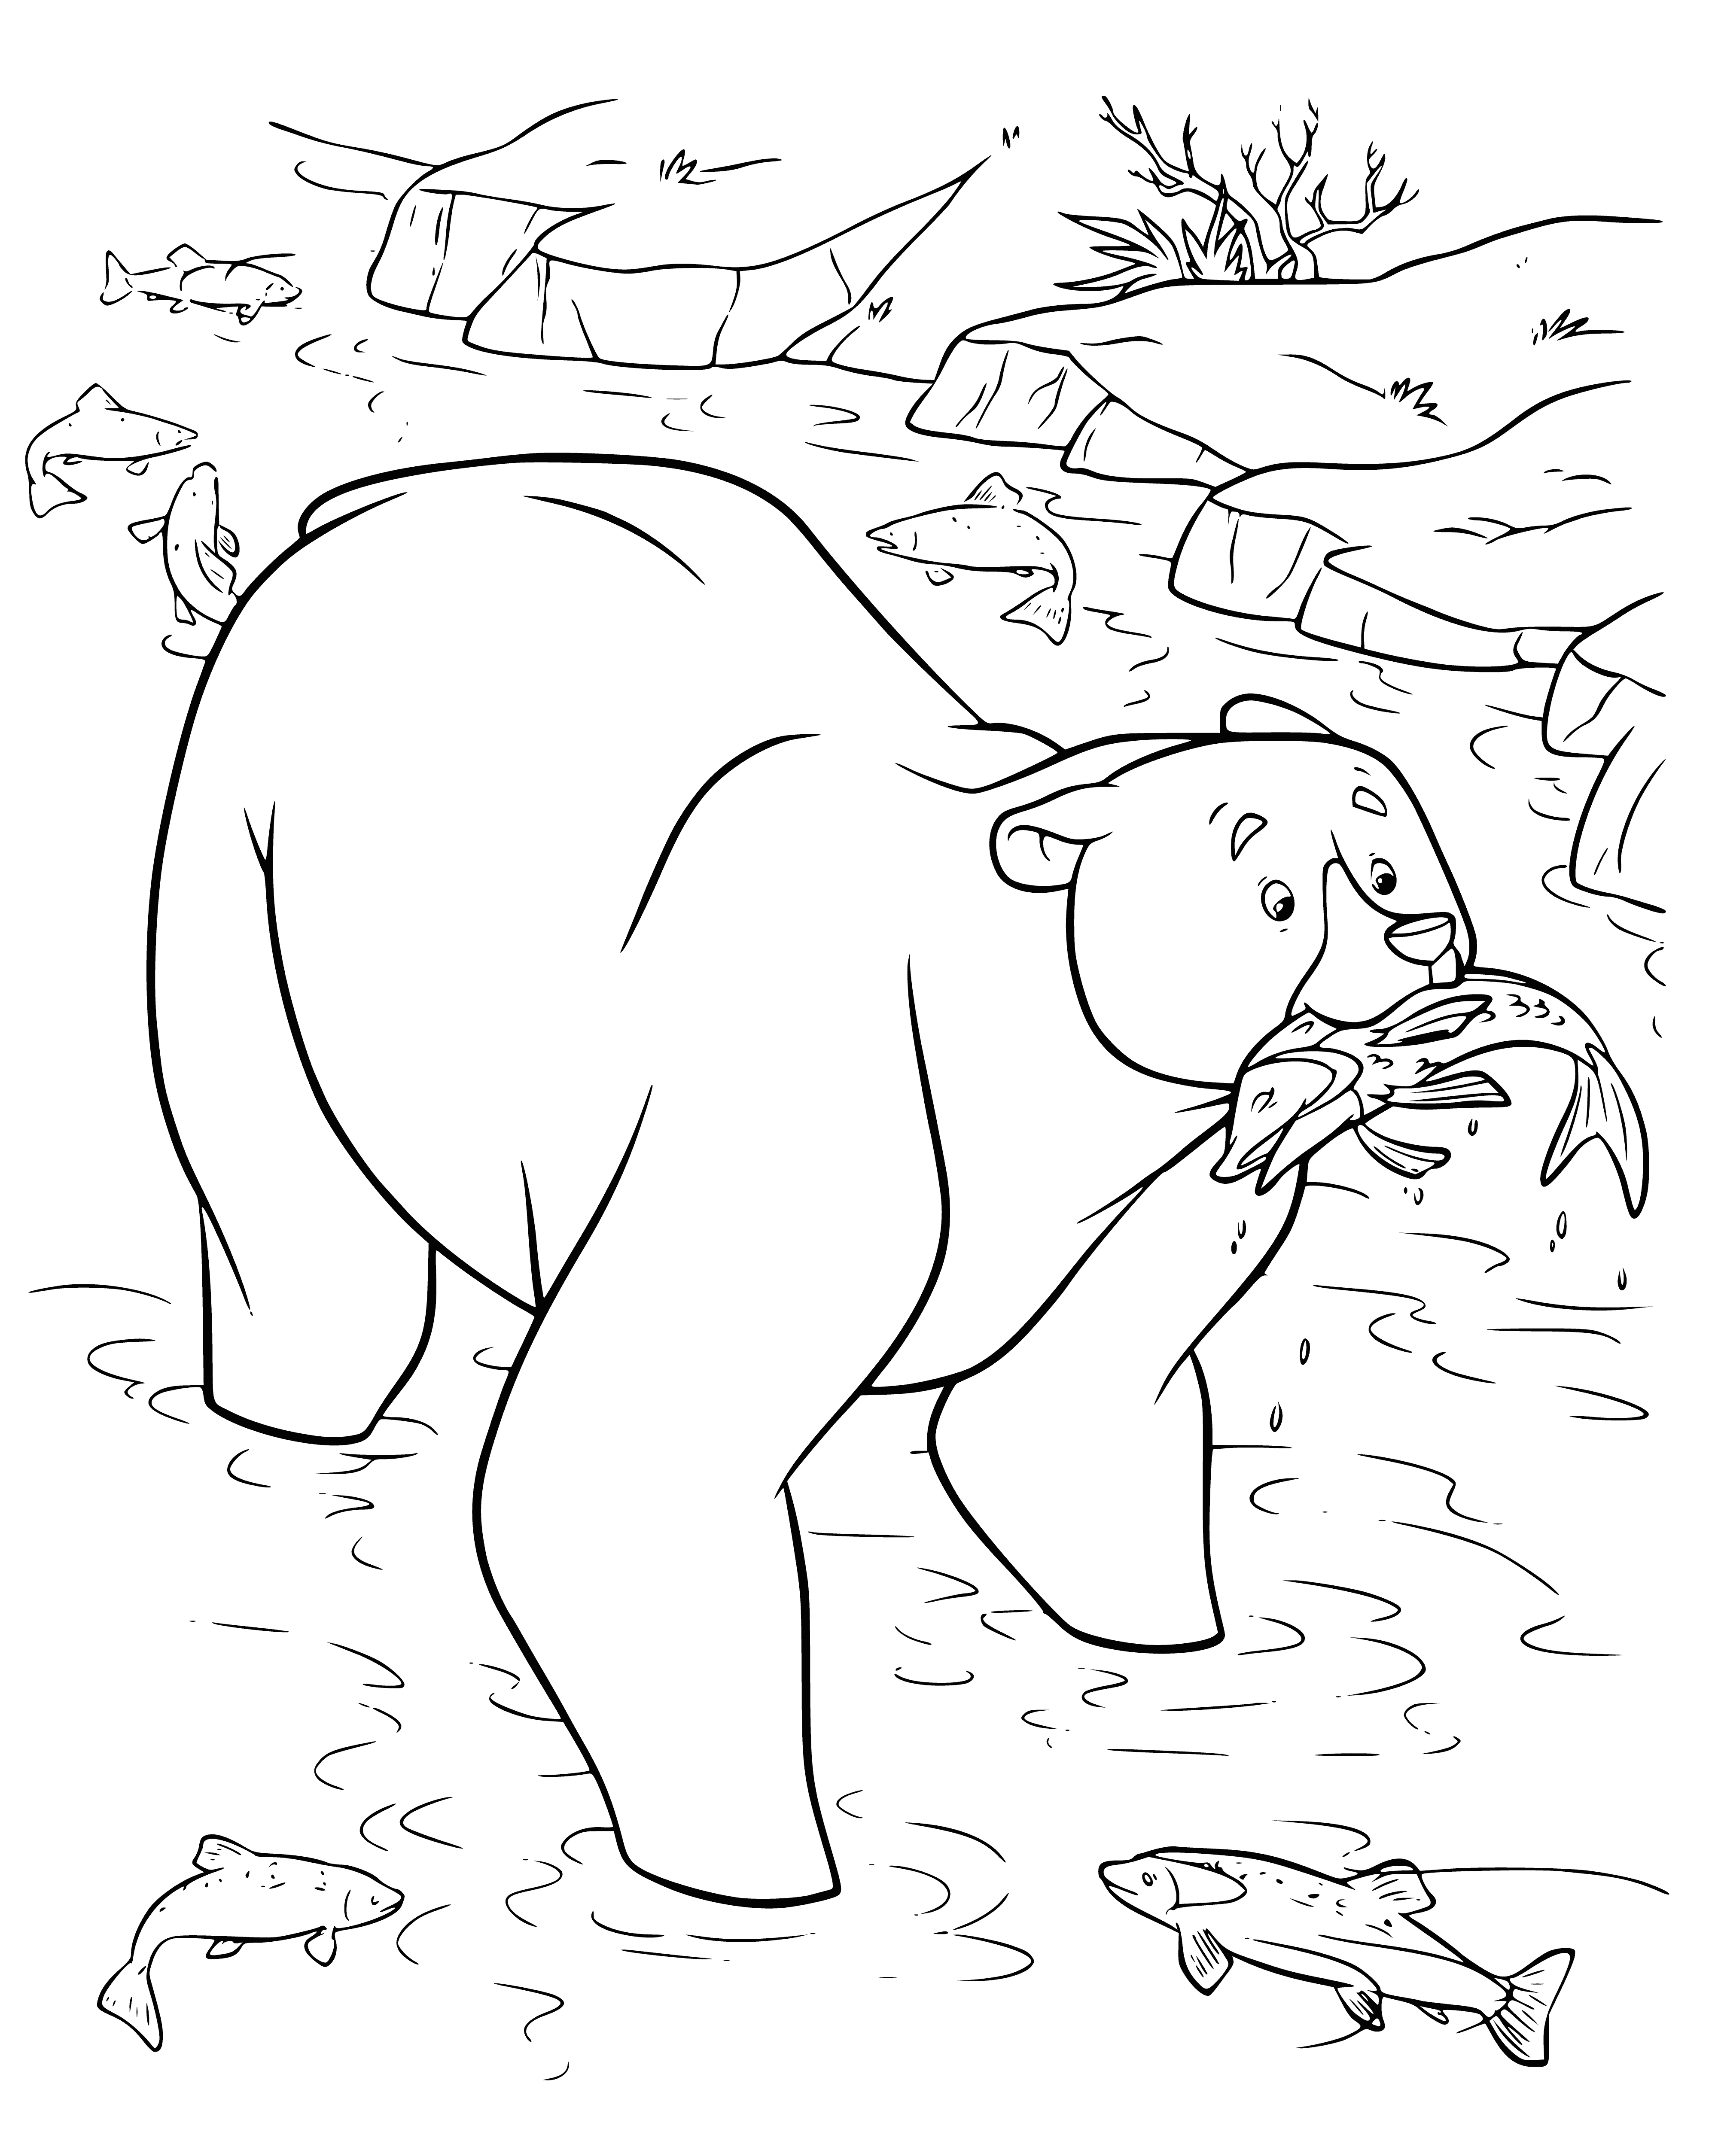 coloring page: She-bear eats fish in river; one paw ready to take a bite.